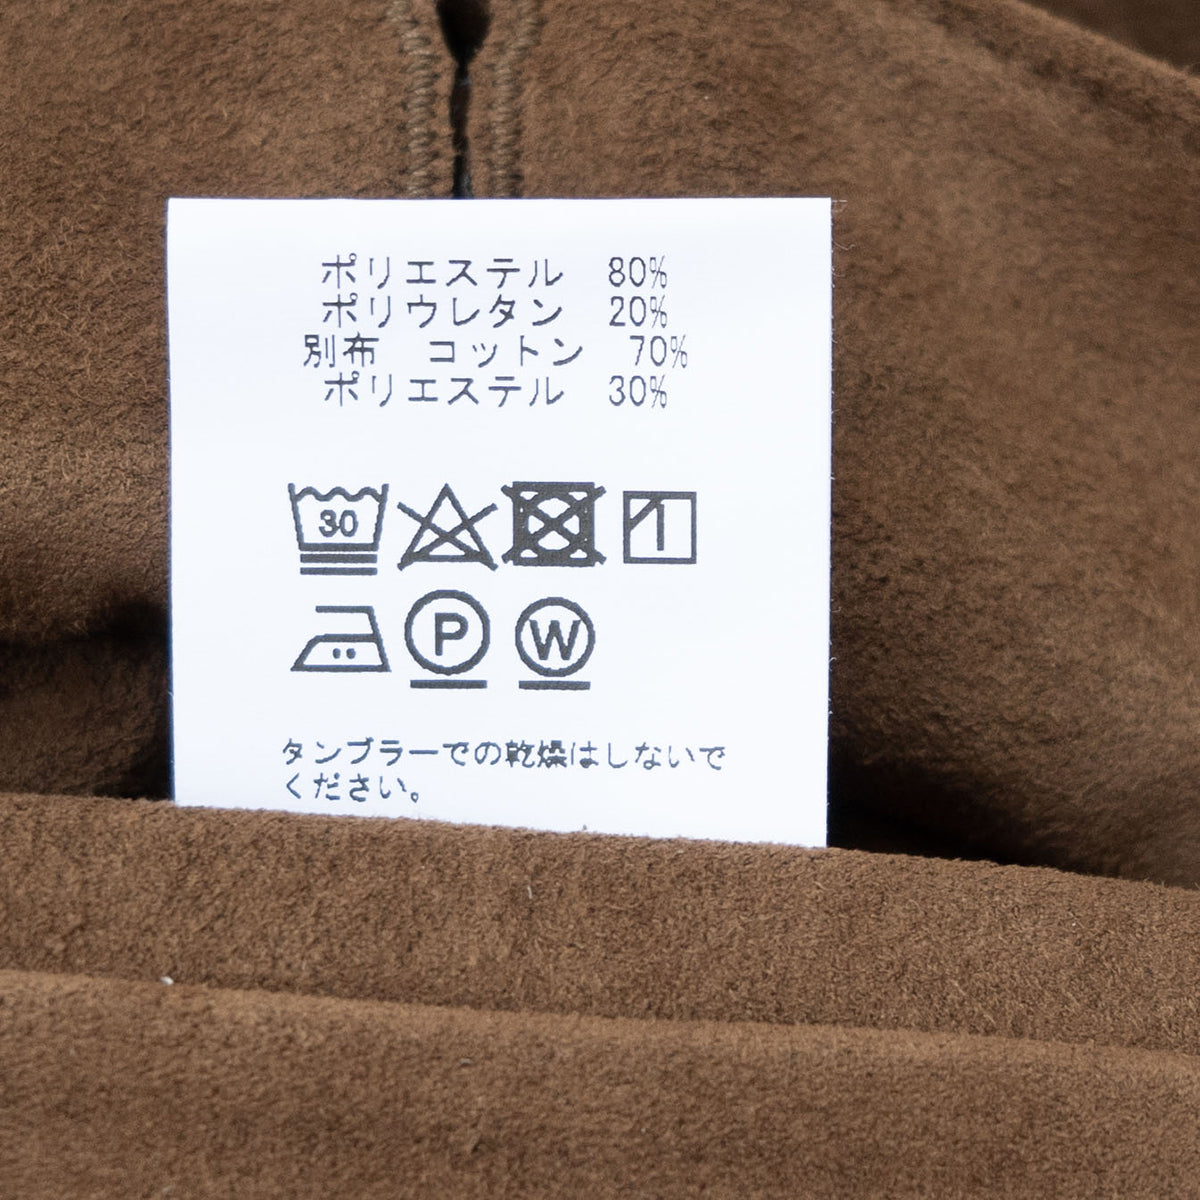 COLONY CLOTHING / Ultrasuede®  プリーツショーツ / CC2401-PT05-1